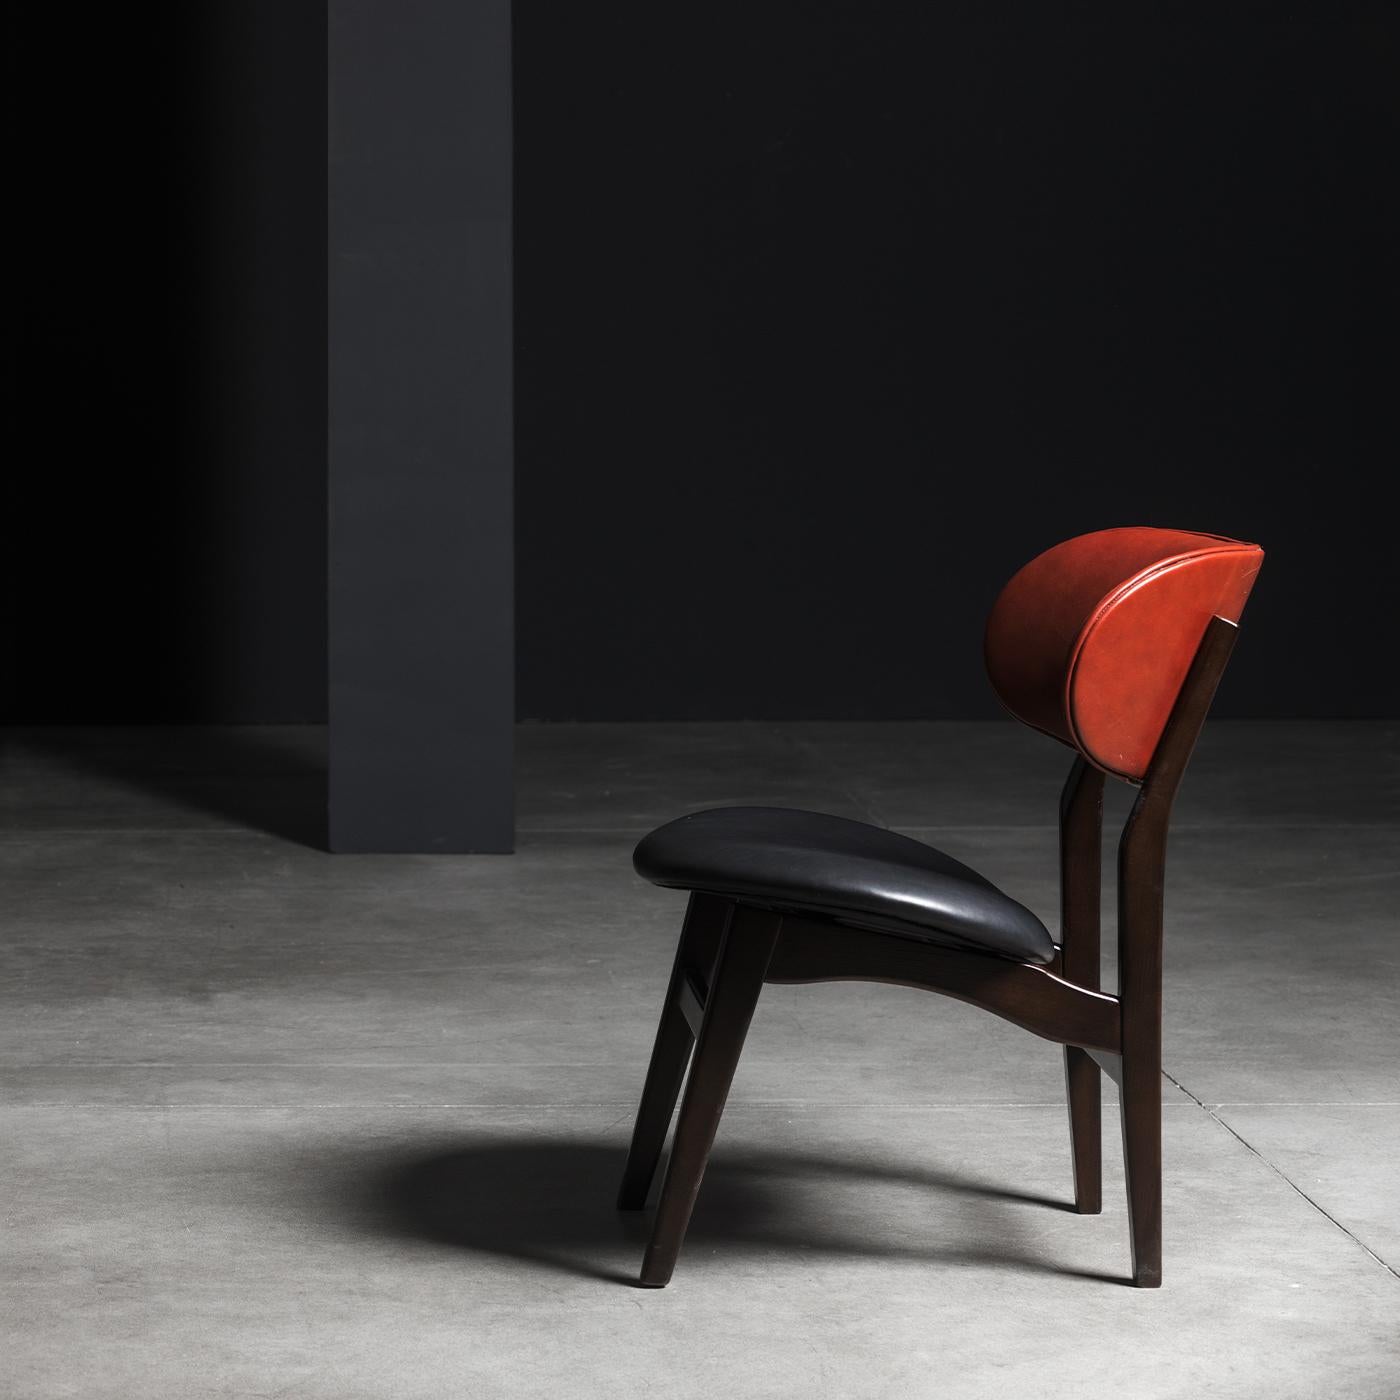 This chair features a sleek, modern silhouette that evokes early 20th century design. Its wooden structure is finished in black, while it features a black leather seat, along with a back in red leather. Its height is 39 cm. The Chelini Firenze